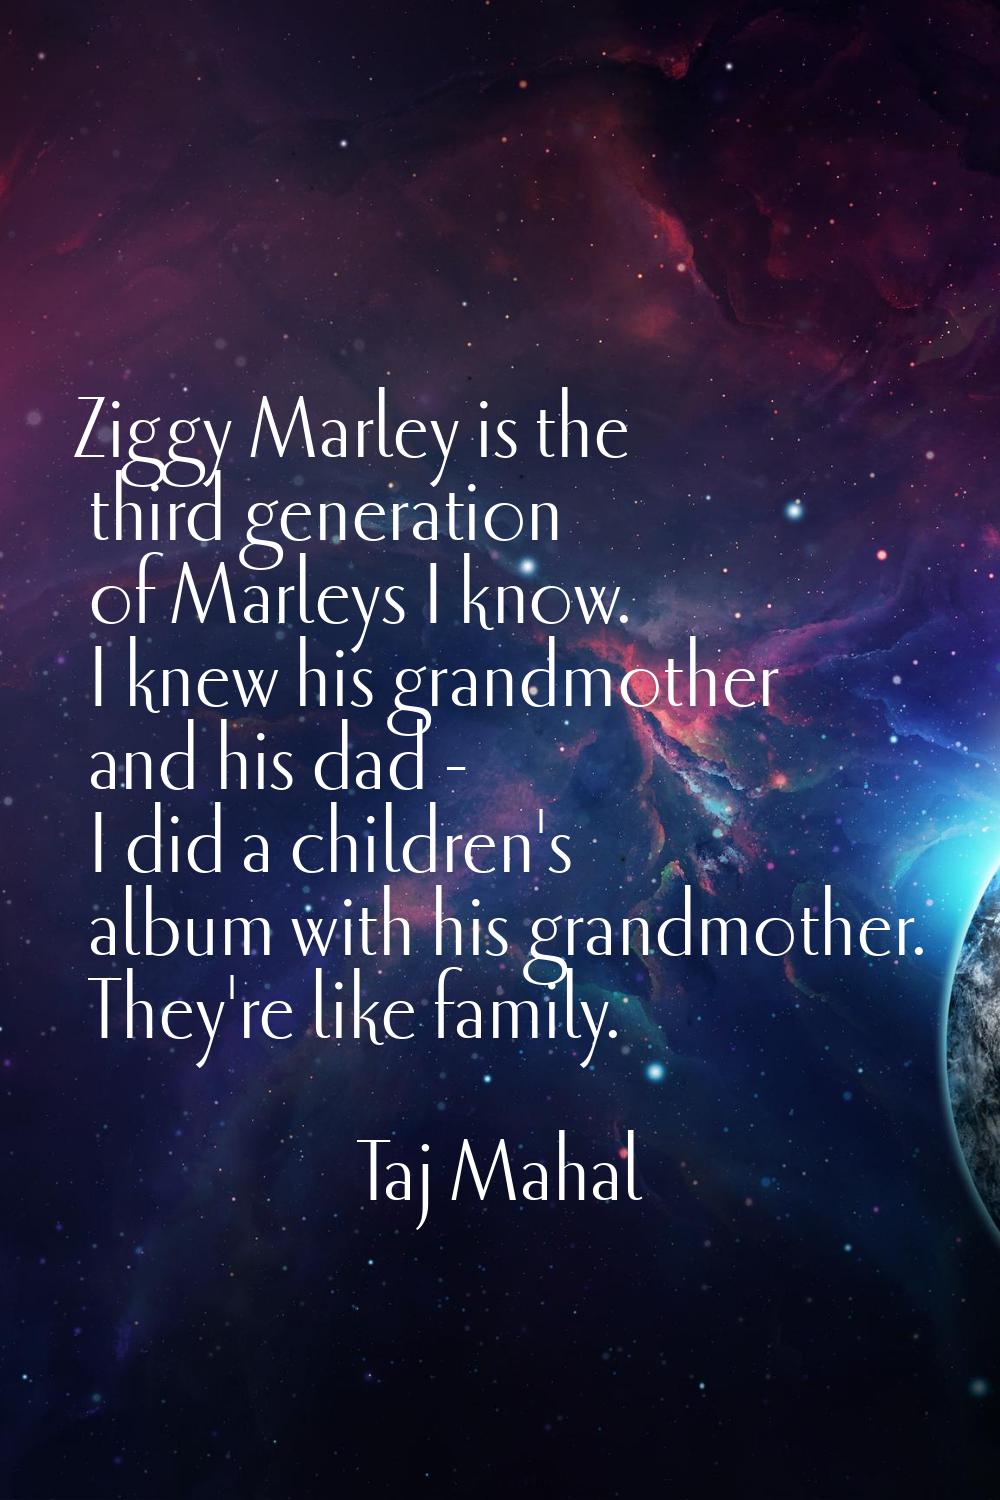 Ziggy Marley is the third generation of Marleys I know. I knew his grandmother and his dad - I did 